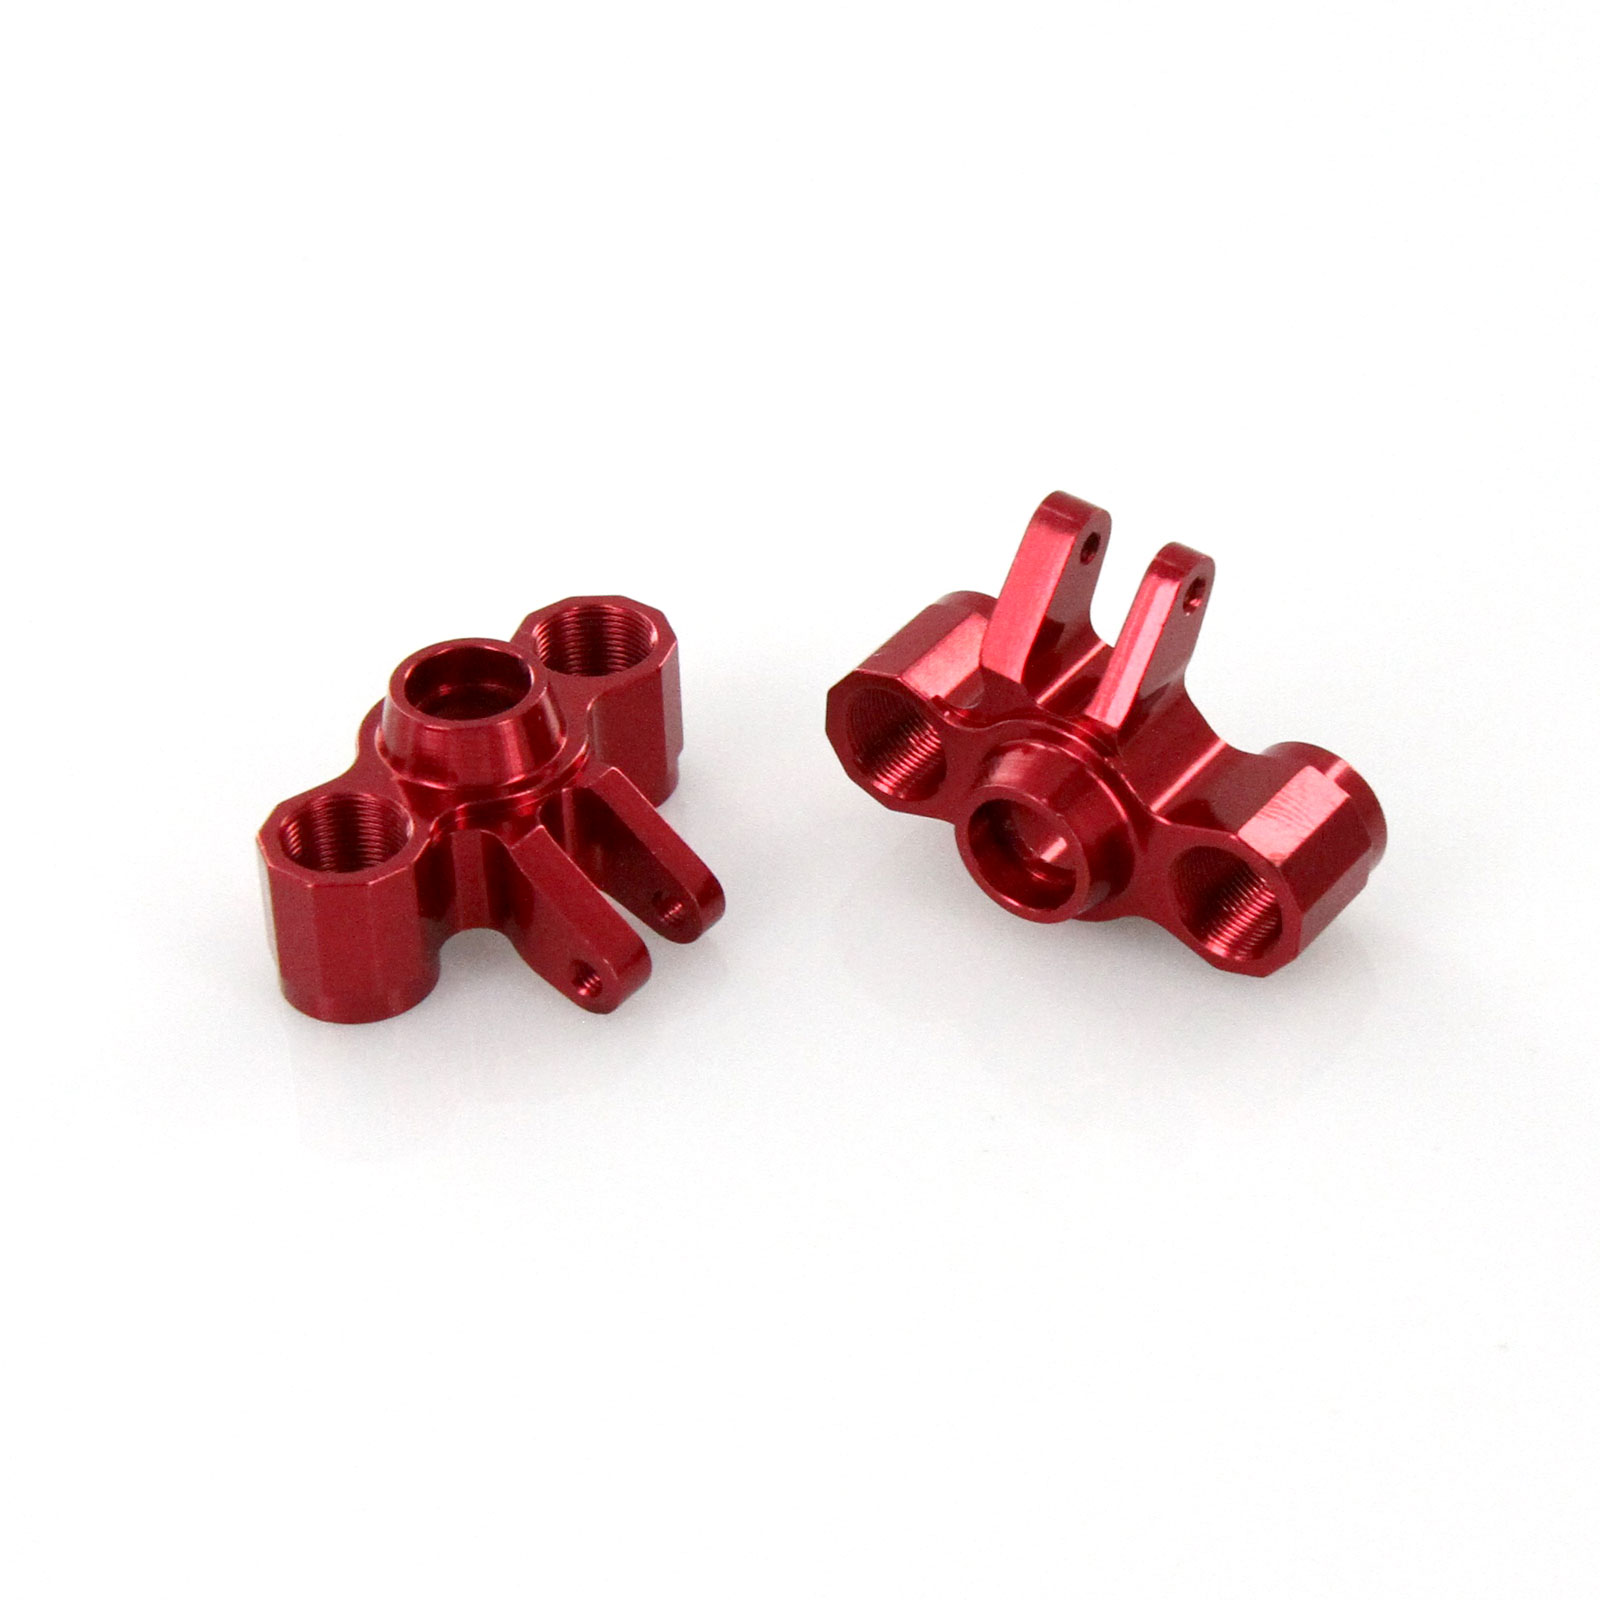 Replaces Traxxas Part 3760A Red fits the Traxxas 1/10 Slash 4X4 and Other Traxxas Models Atomik RC Alloy Front Ultra Shocks 